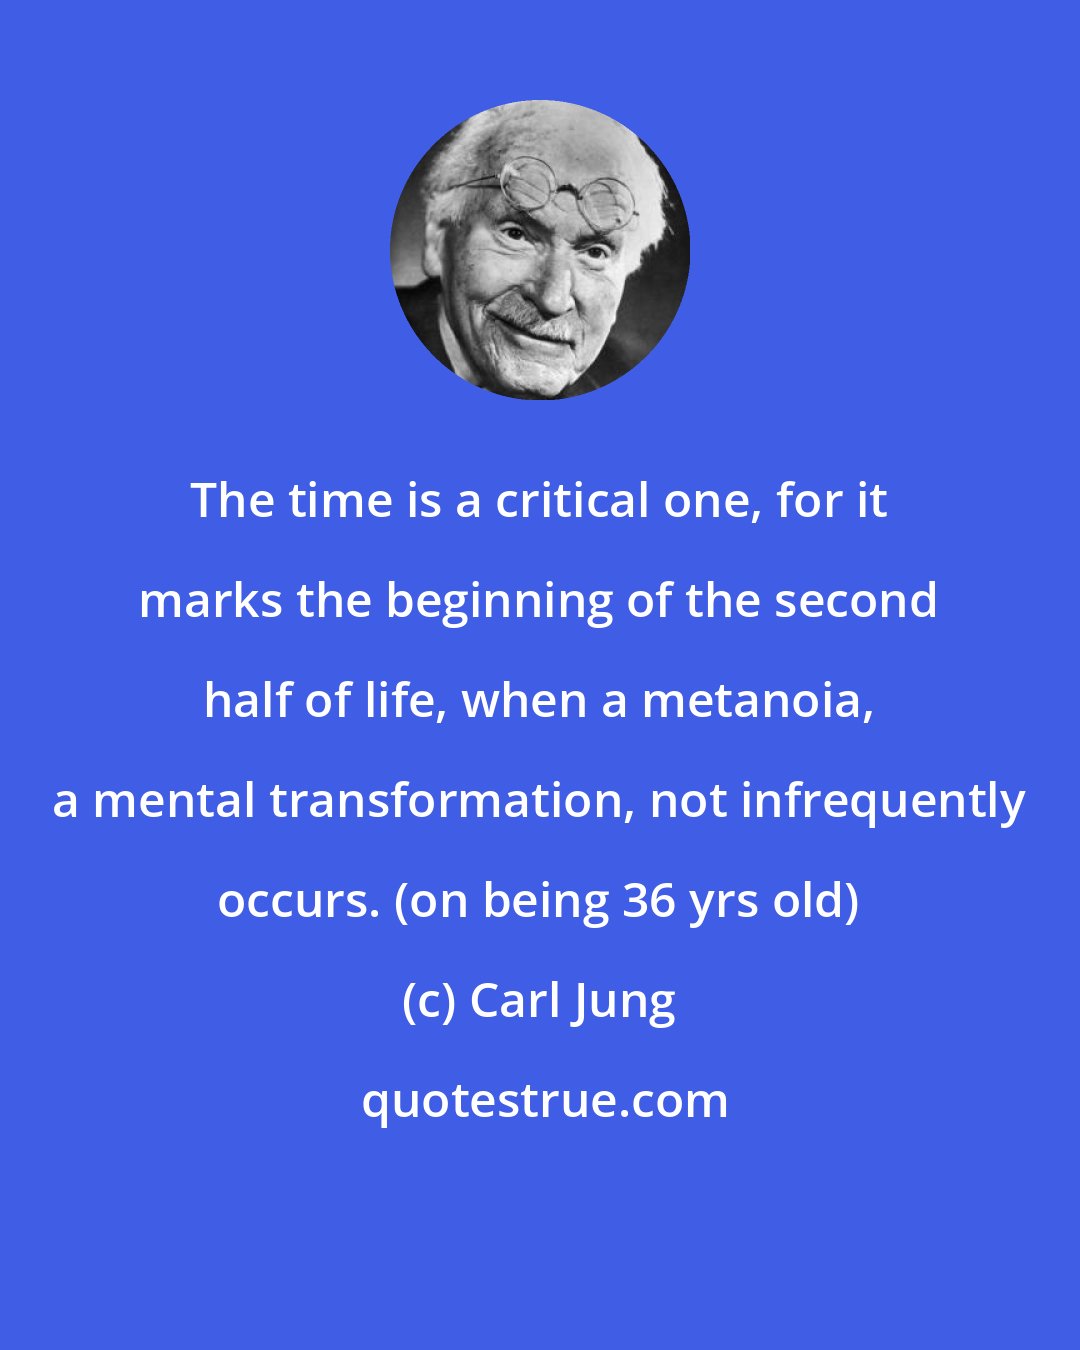 Carl Jung: The time is a critical one, for it marks the beginning of the second half of life, when a metanoia, a mental transformation, not infrequently occurs. (on being 36 yrs old)